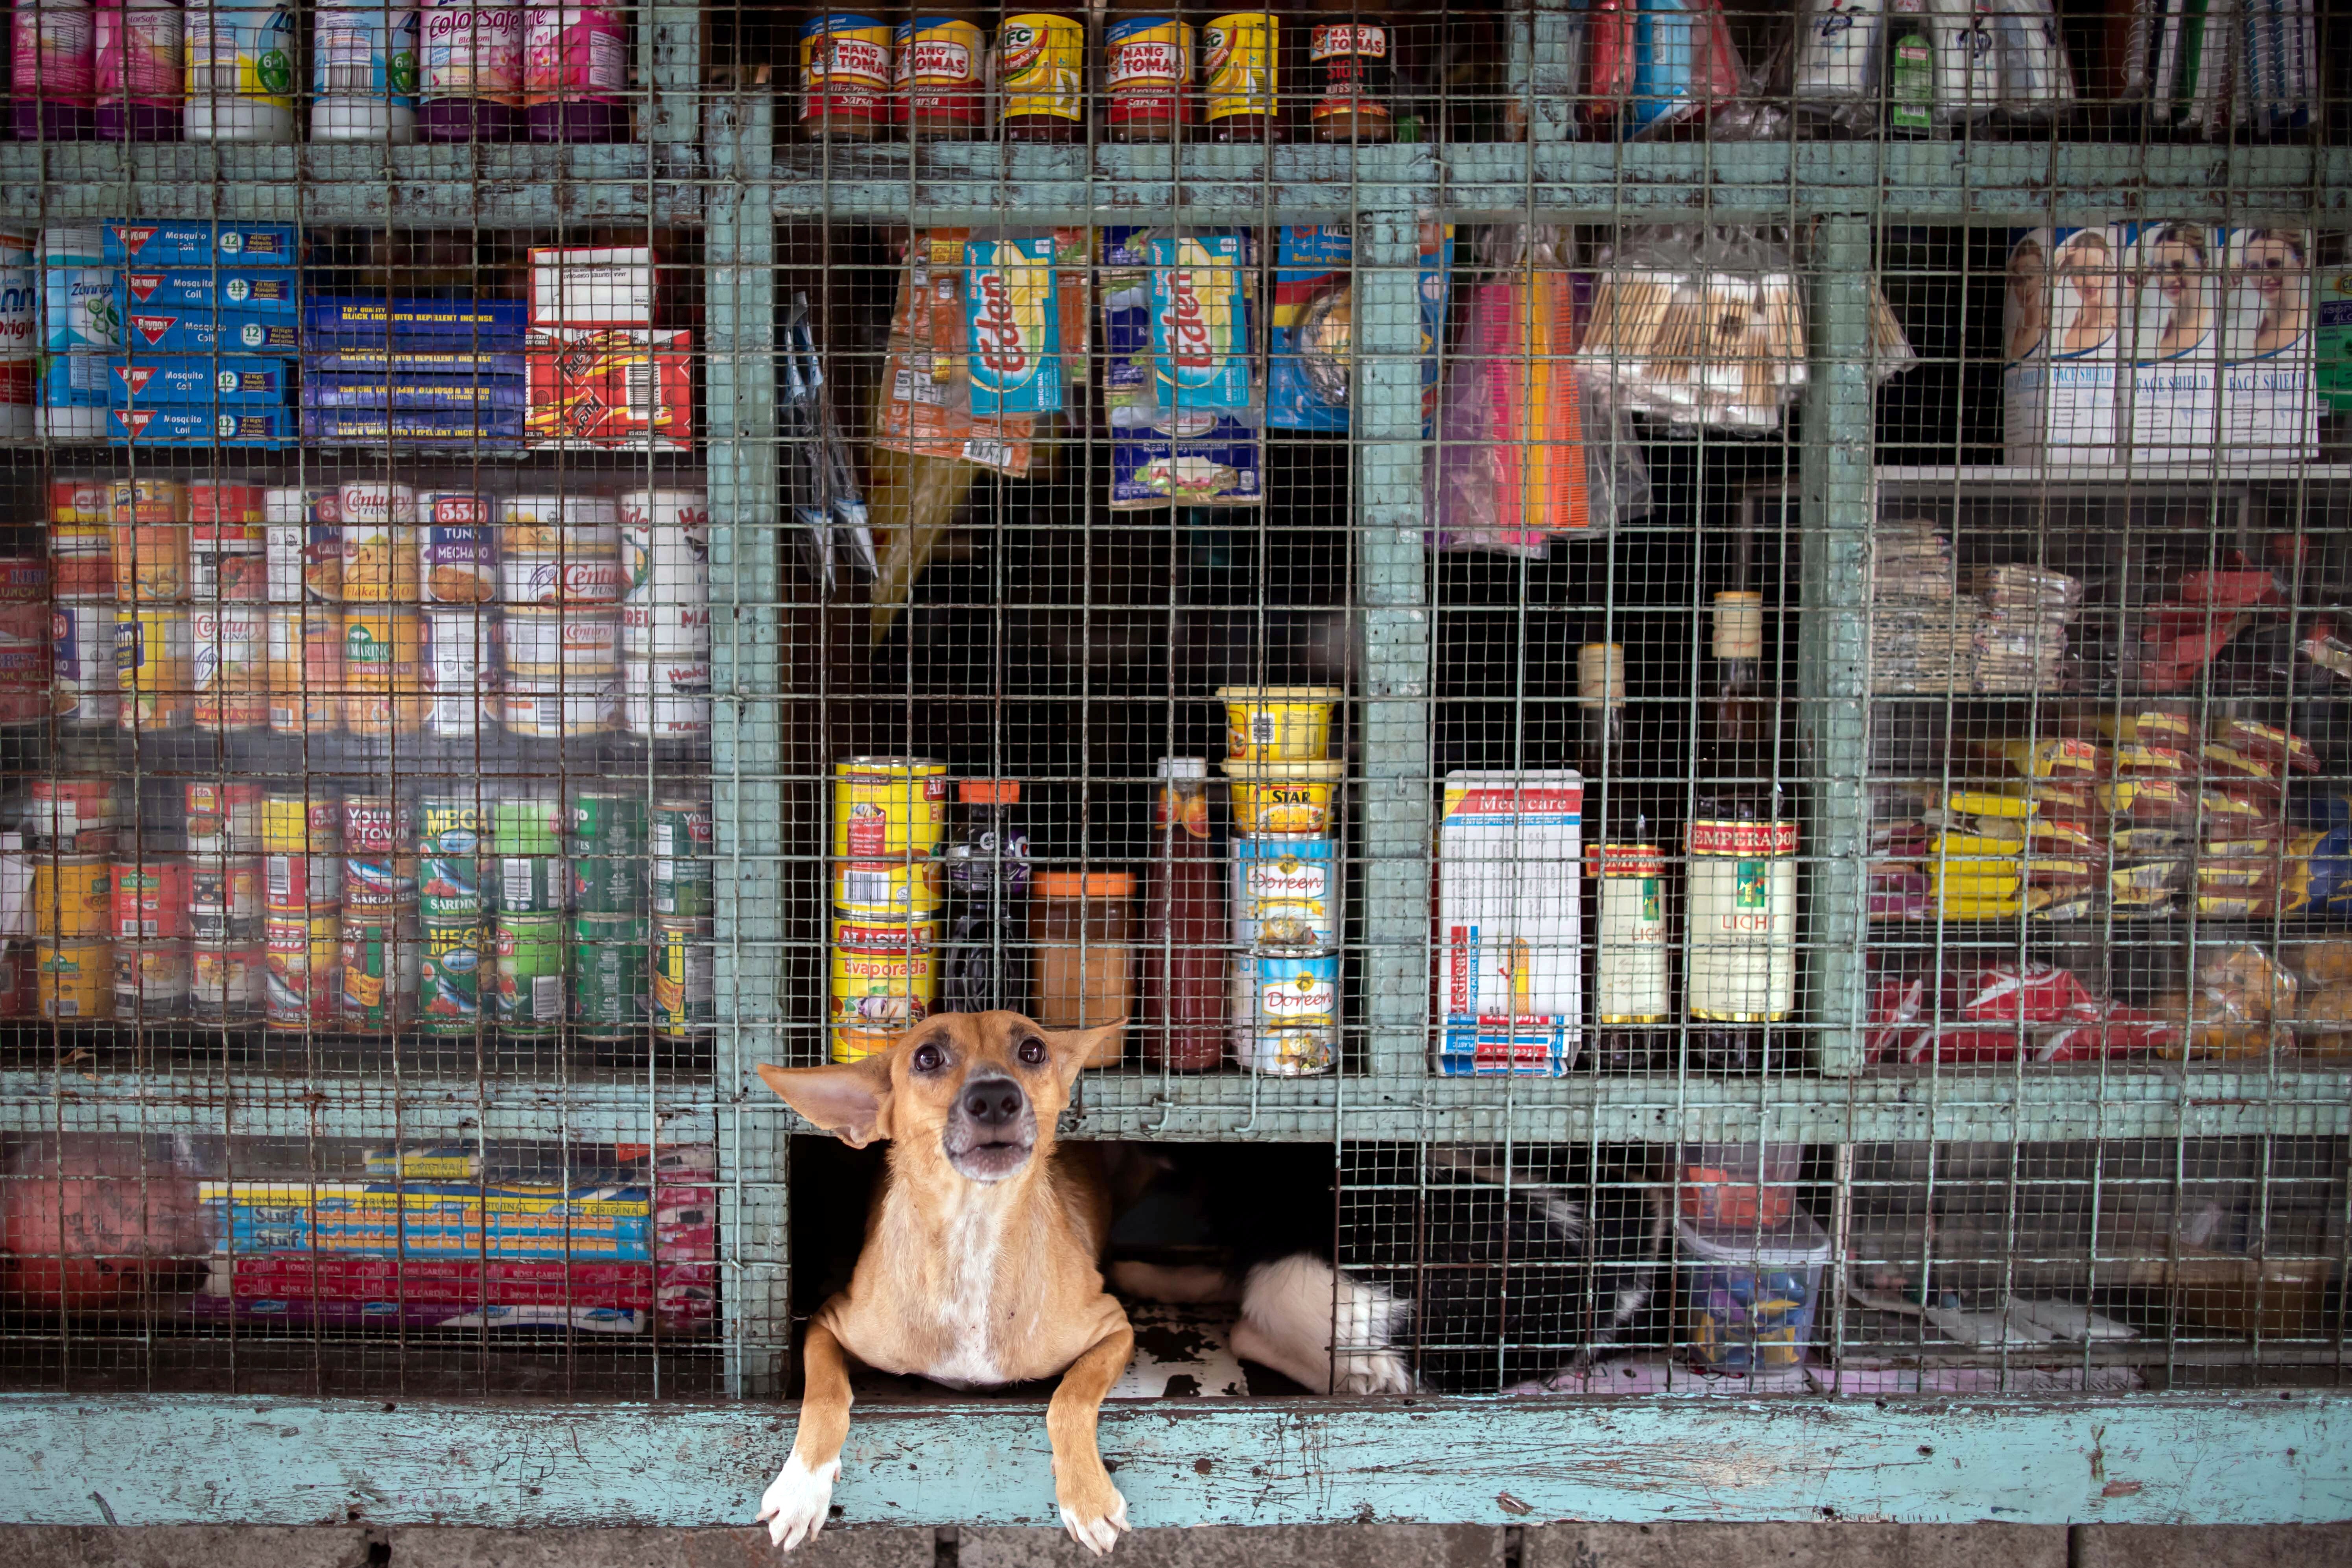 A dog peeks out from a sundries store in Manila, the Philippines, on October 6. Many consumers in underbanked regions rely on cash in their daily lives. Some use cash-based payments even when shopping online, according to PPRO data. Photo: Reuters